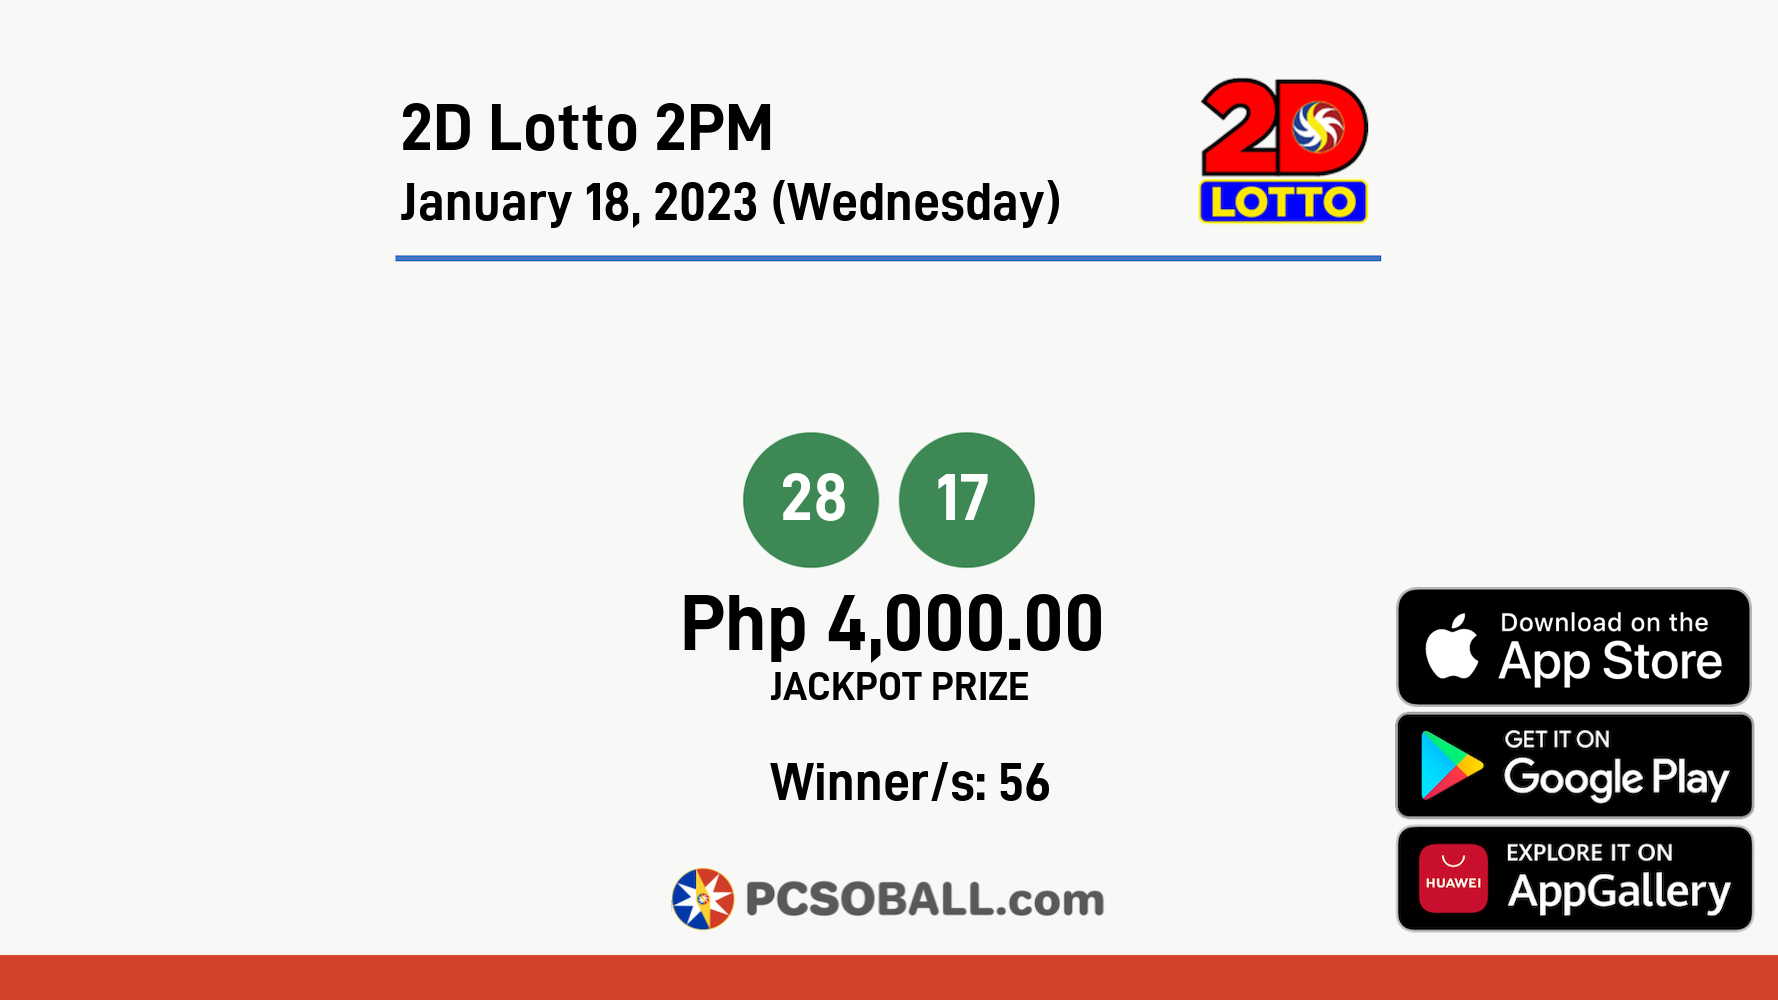 2D Lotto 2PM January 18, 2023 (Wednesday) Result